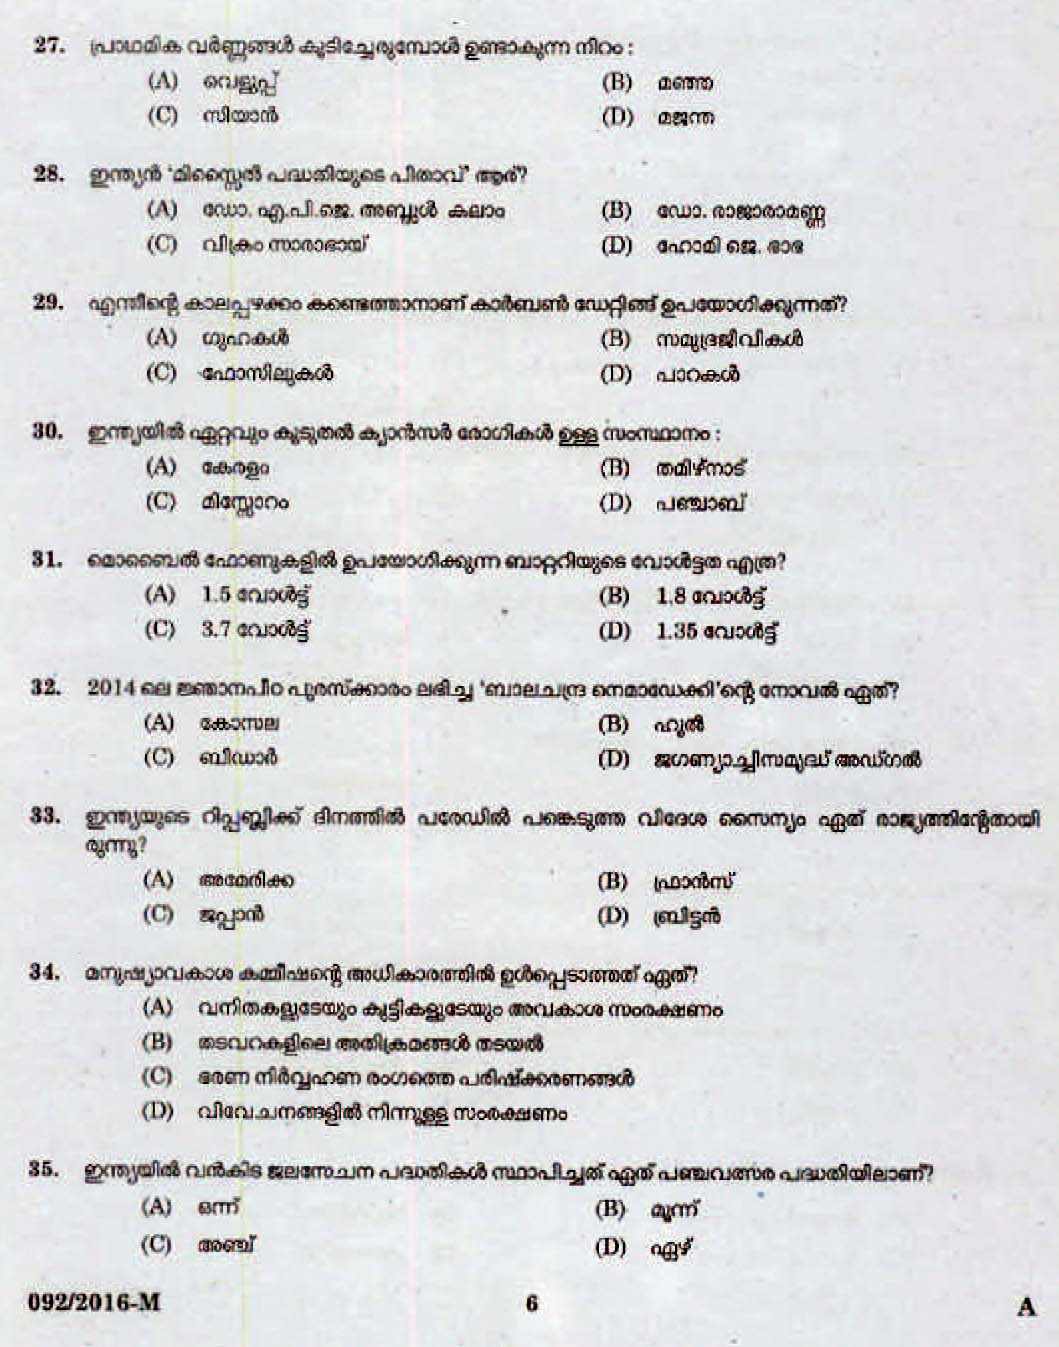 LD Clerk Question Paper Malayalam 2016 Paper Code 0922016 M 4